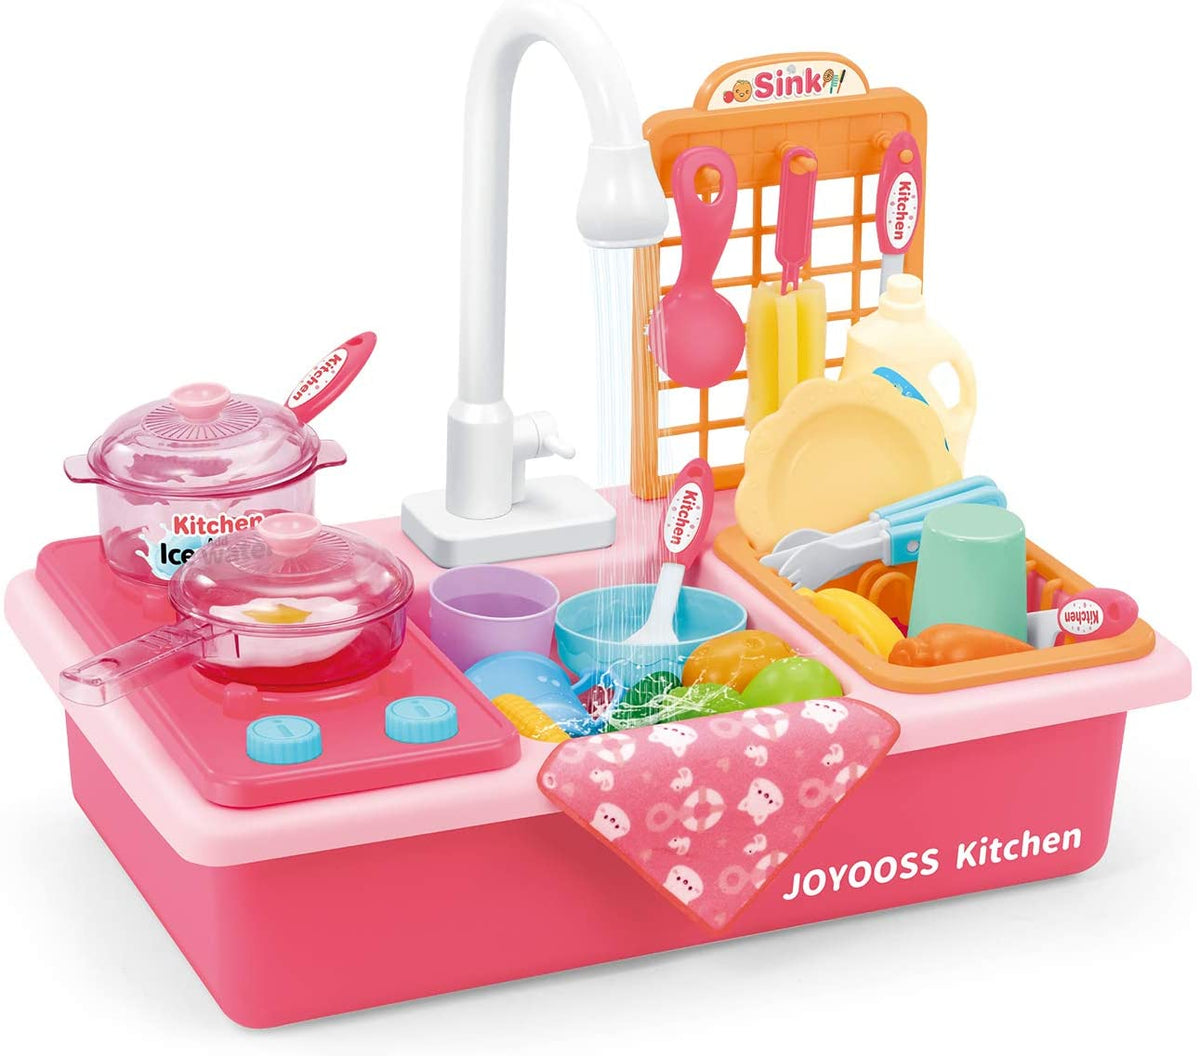 Joyooss Kids Kitchen Playsets, Play Sink with Running Water & Functional Faucet, Water Toys Toddler Toys for Kids - Pink